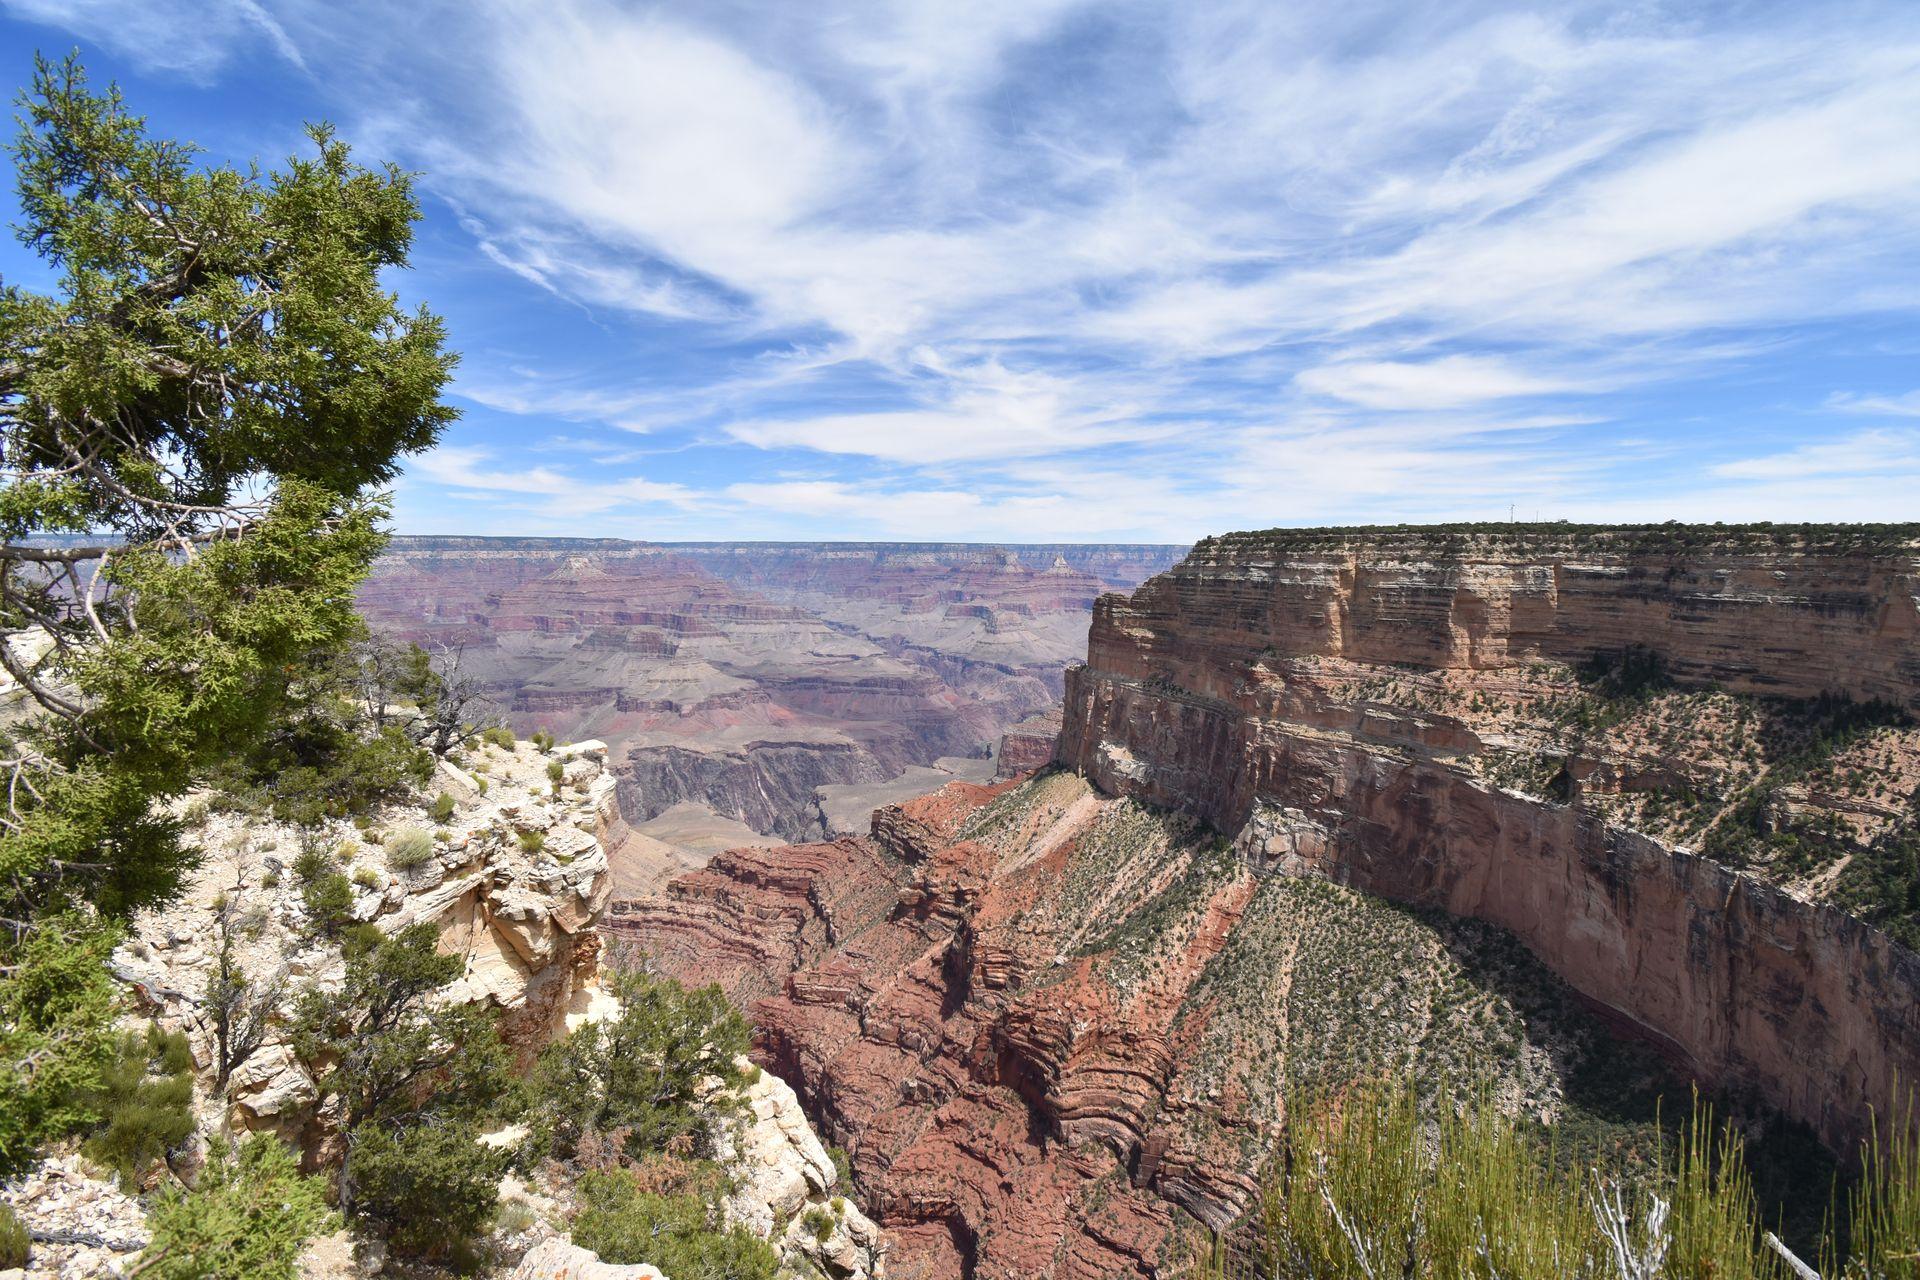 Looking down into the Grand Canyon from an overlook in the South Rim.